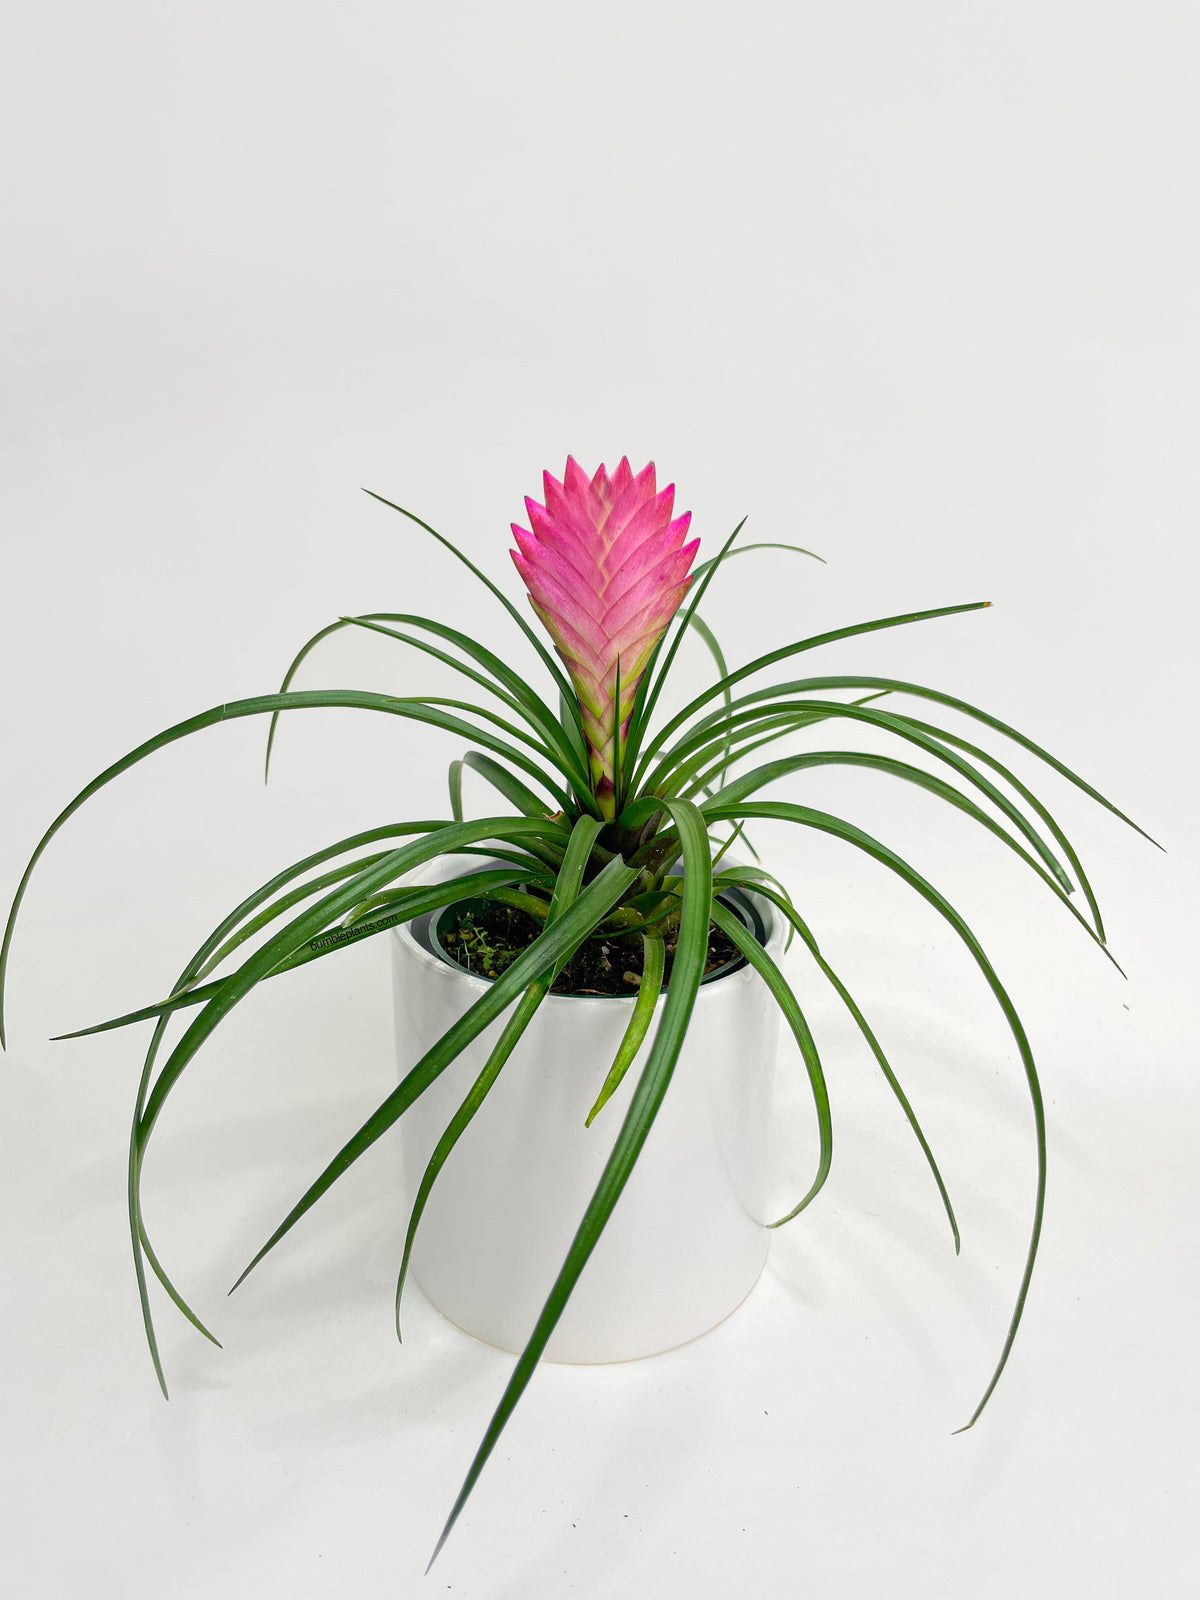 Tillandsia Cyanea 'Pink Quill' Bromeliad by Bumble Plants